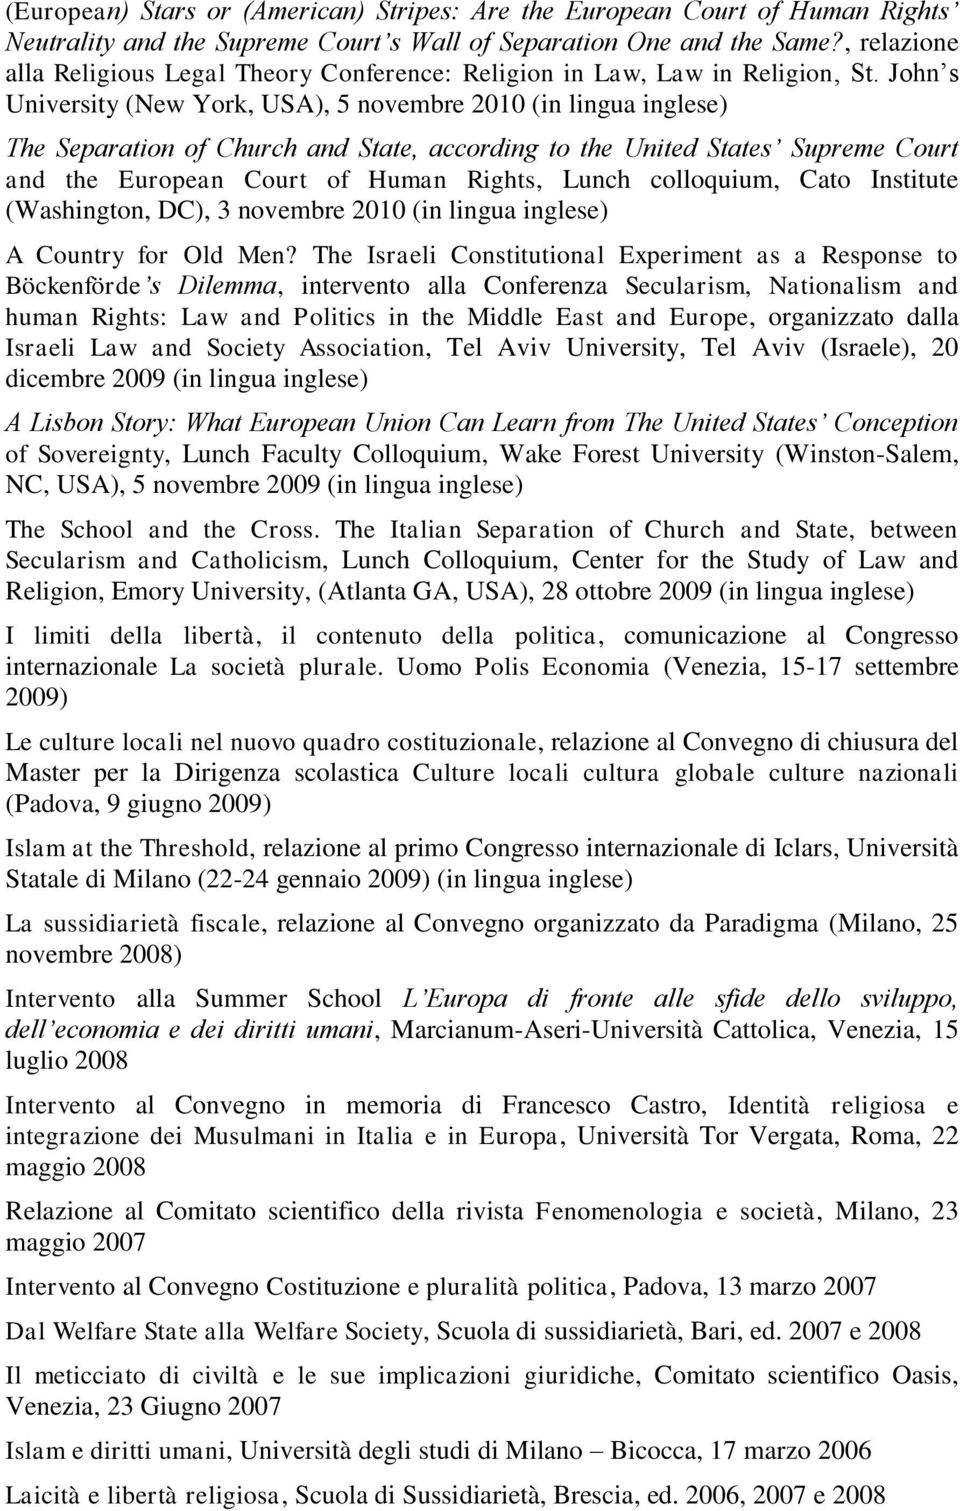 John s University (New York, USA), 5 novembre 2010 (in lingua inglese) The Separation of Church and State, according to the United States Supreme Court and the European Court of Human Rights, Lunch